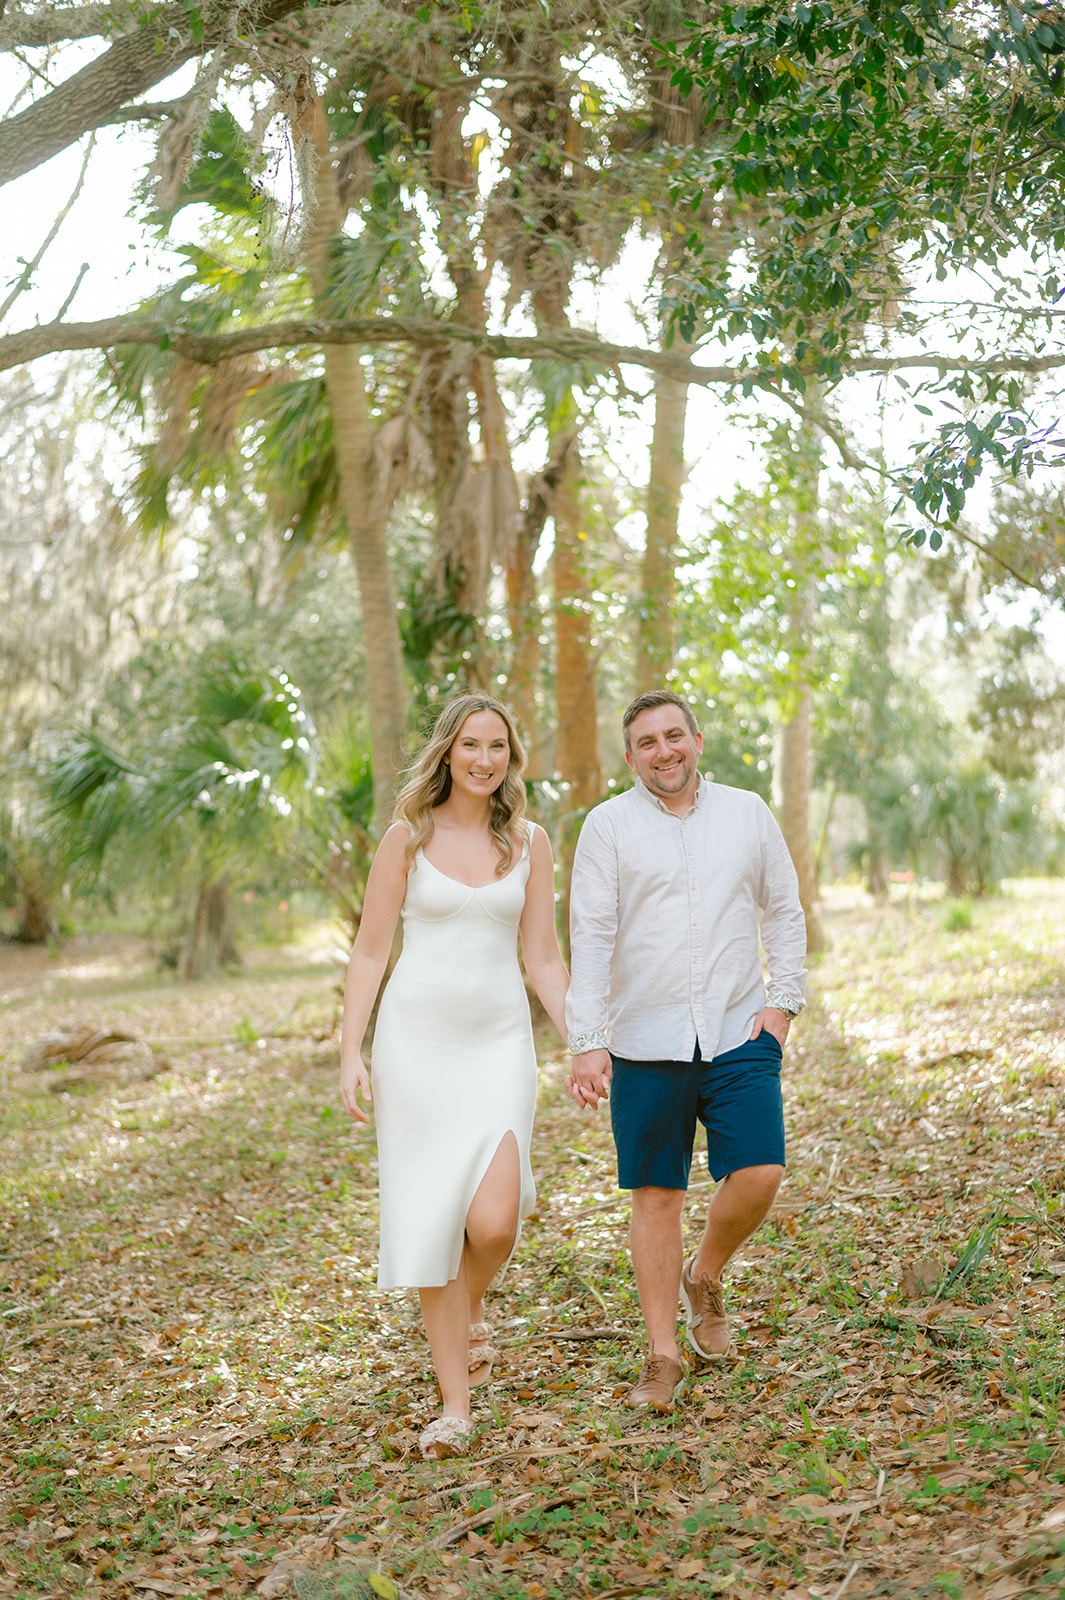 "Dreamy waterfront engagement photography in Tampa, Florida"
